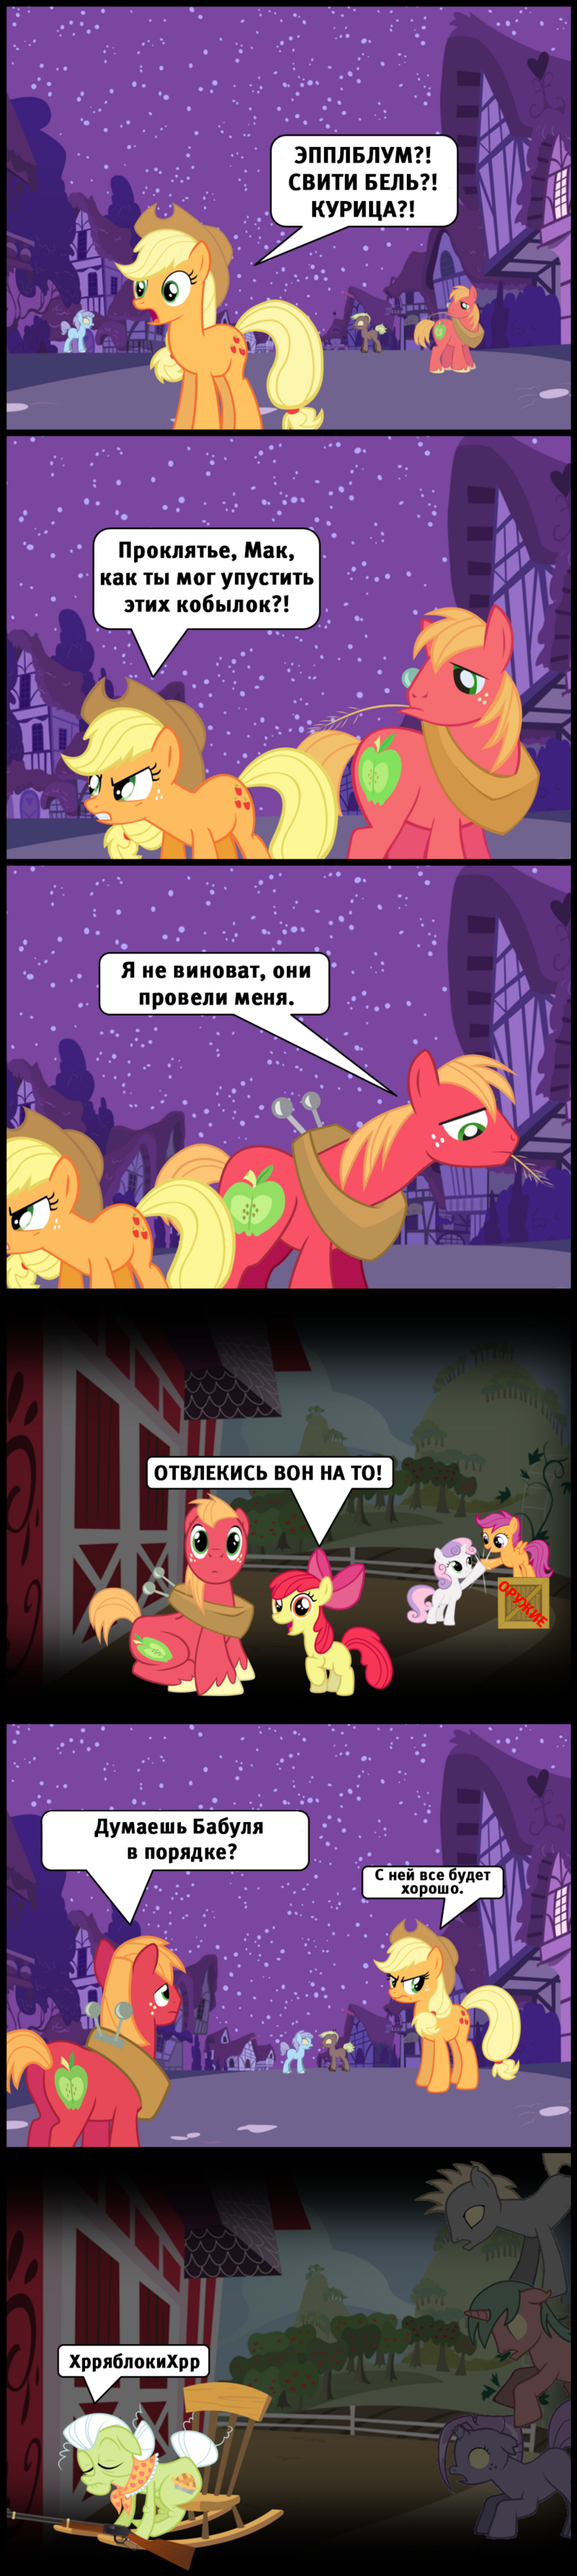 Page 7 I Feel Like I've Been Forgetting Somepony